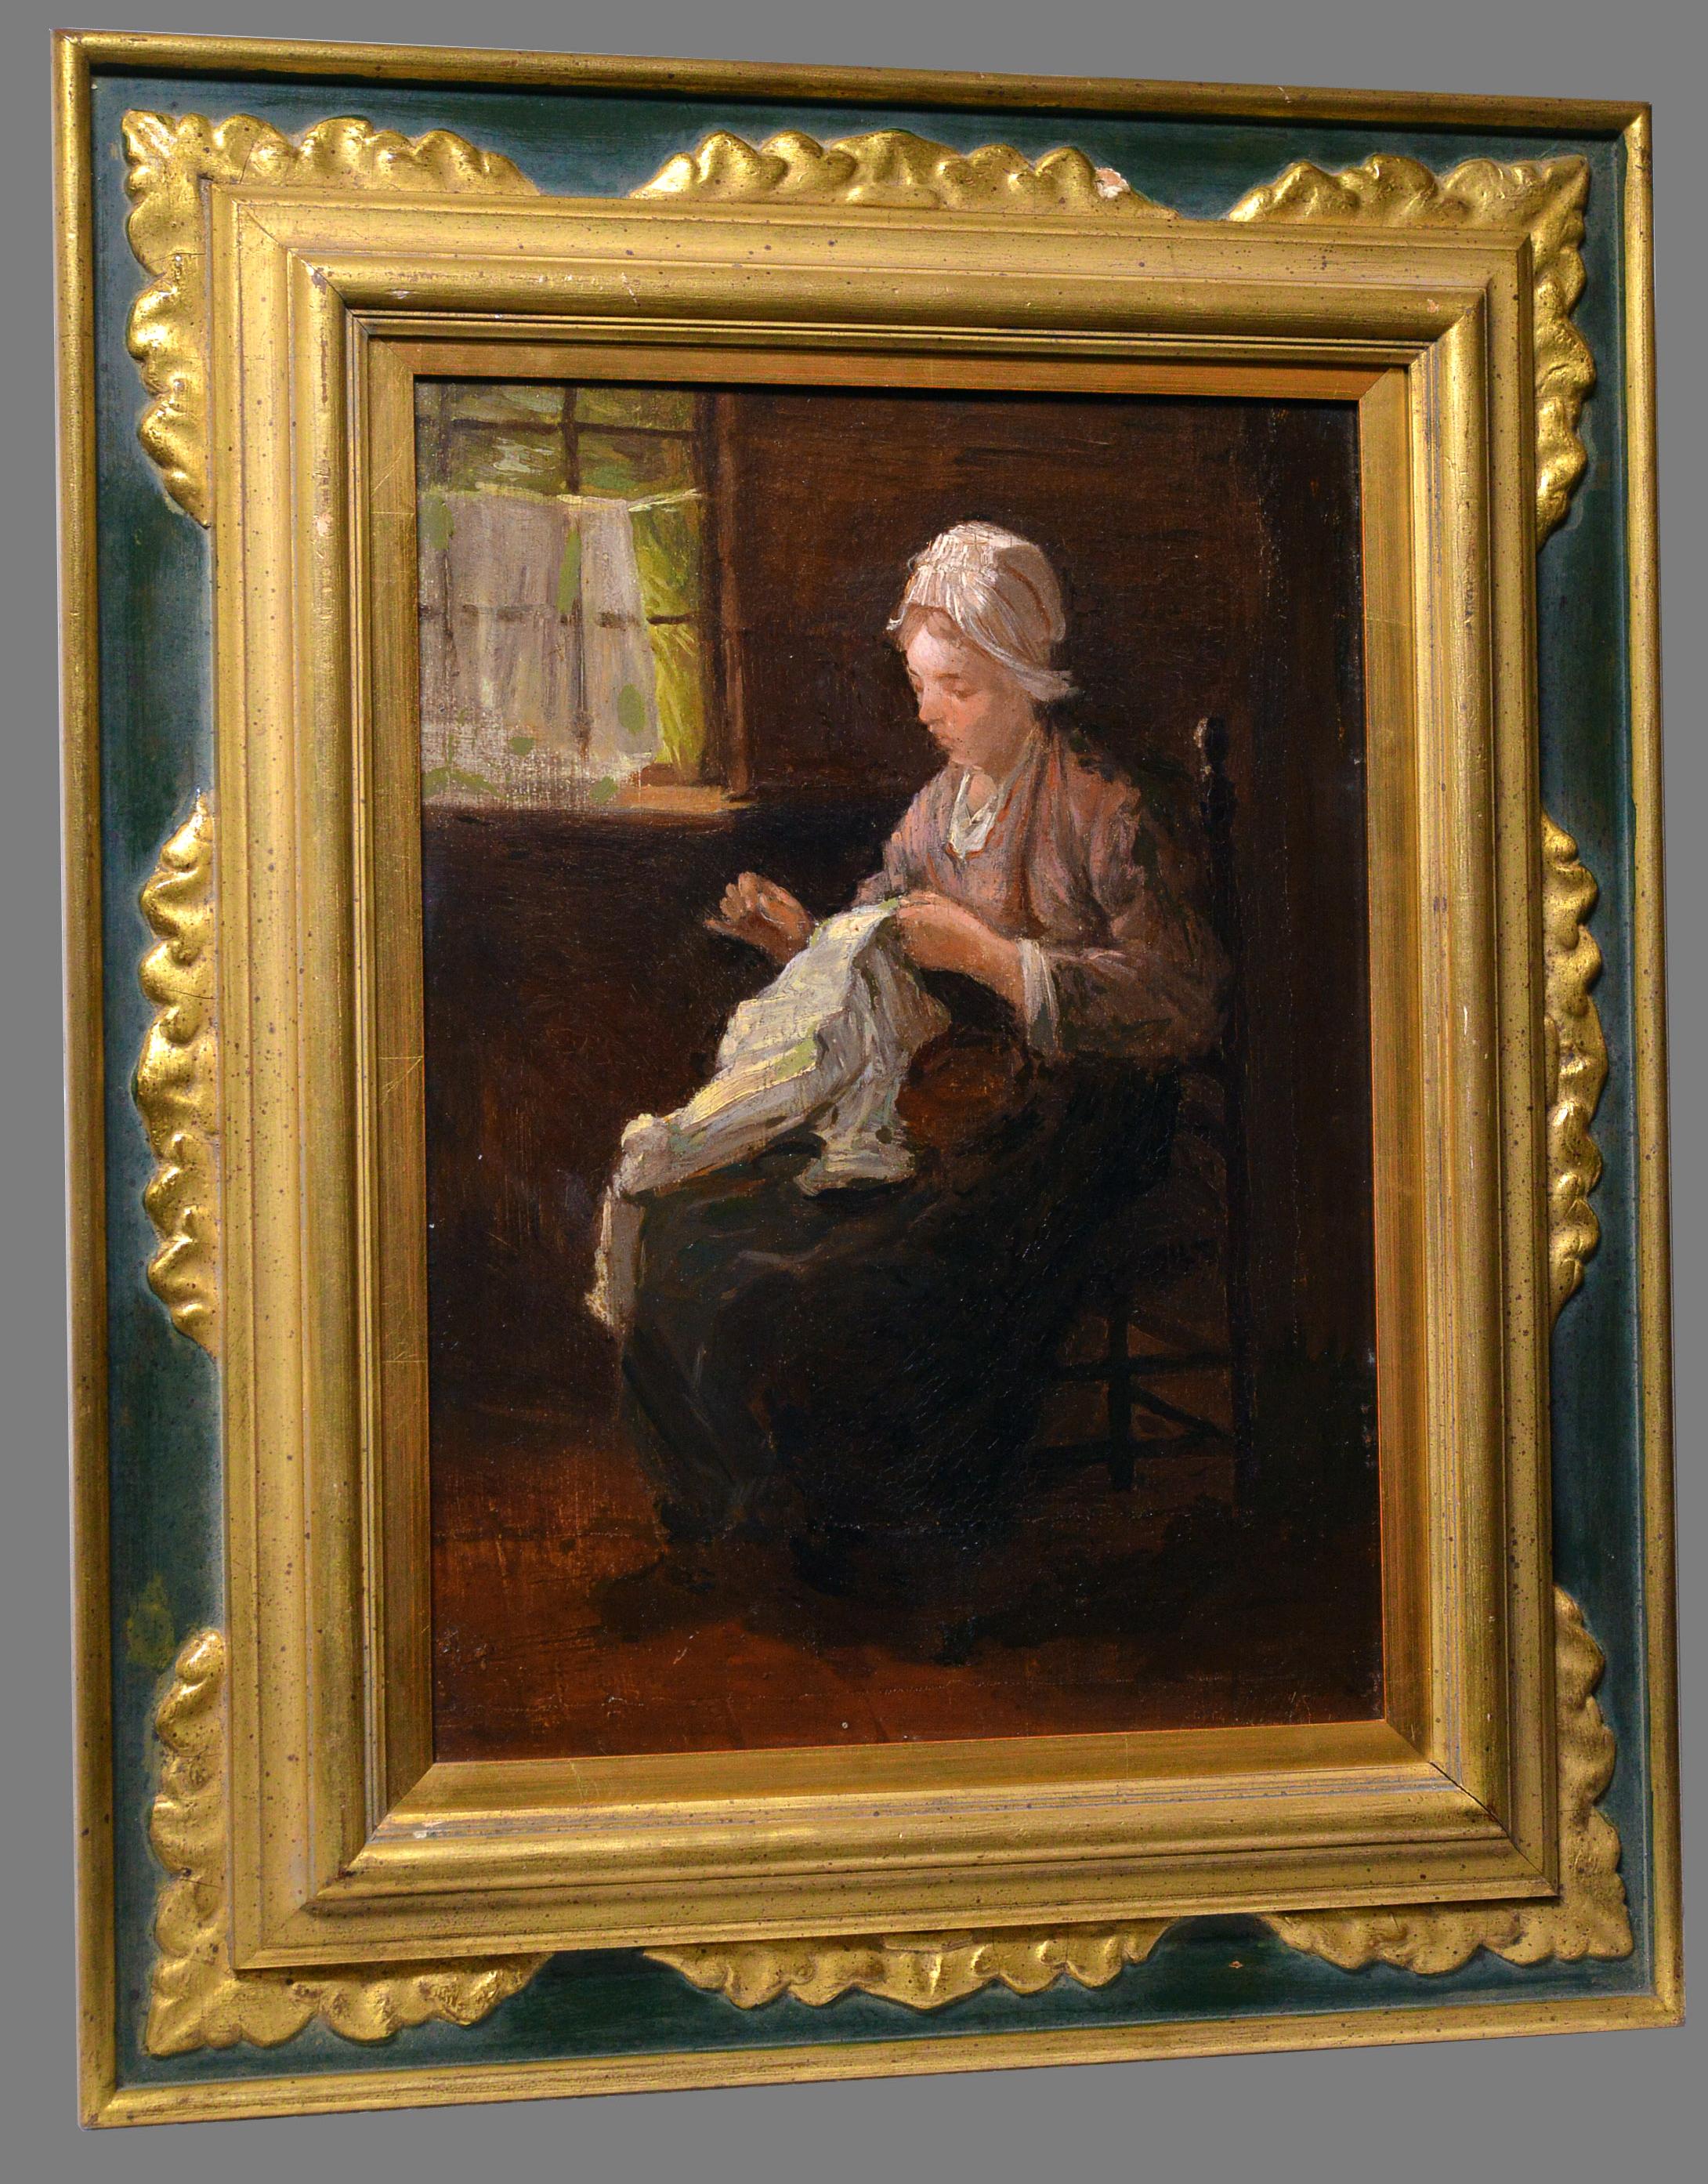 Dutch interior scene Peasant girl sewing 19th century Oil painting - Painting by Israëls, Jozef